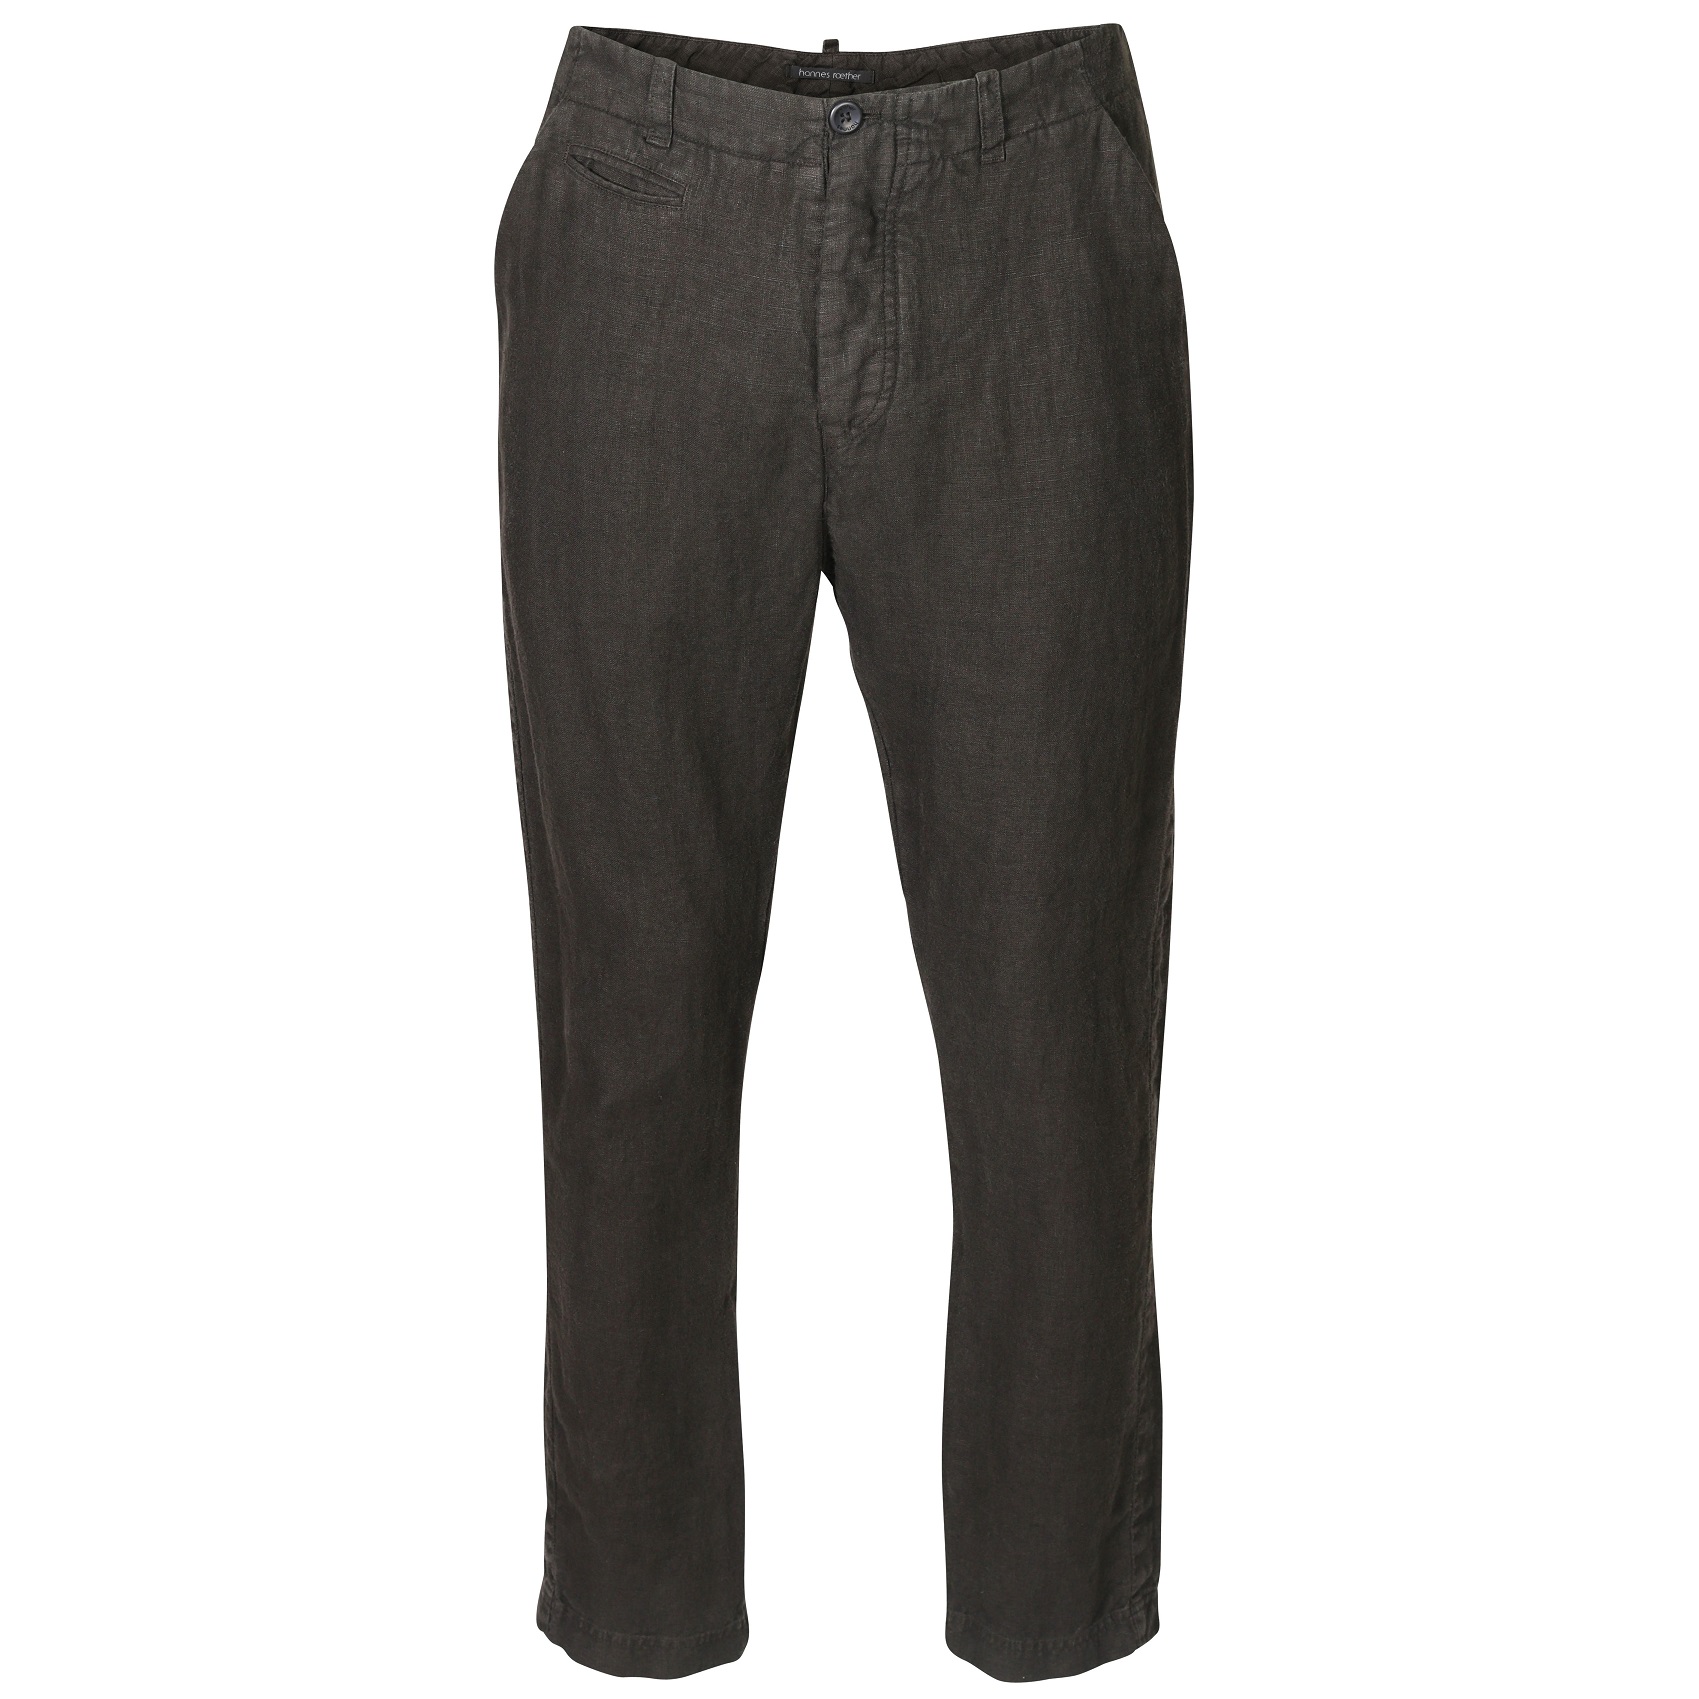 HANNES ROETHER Linen Pant in Dark Olive